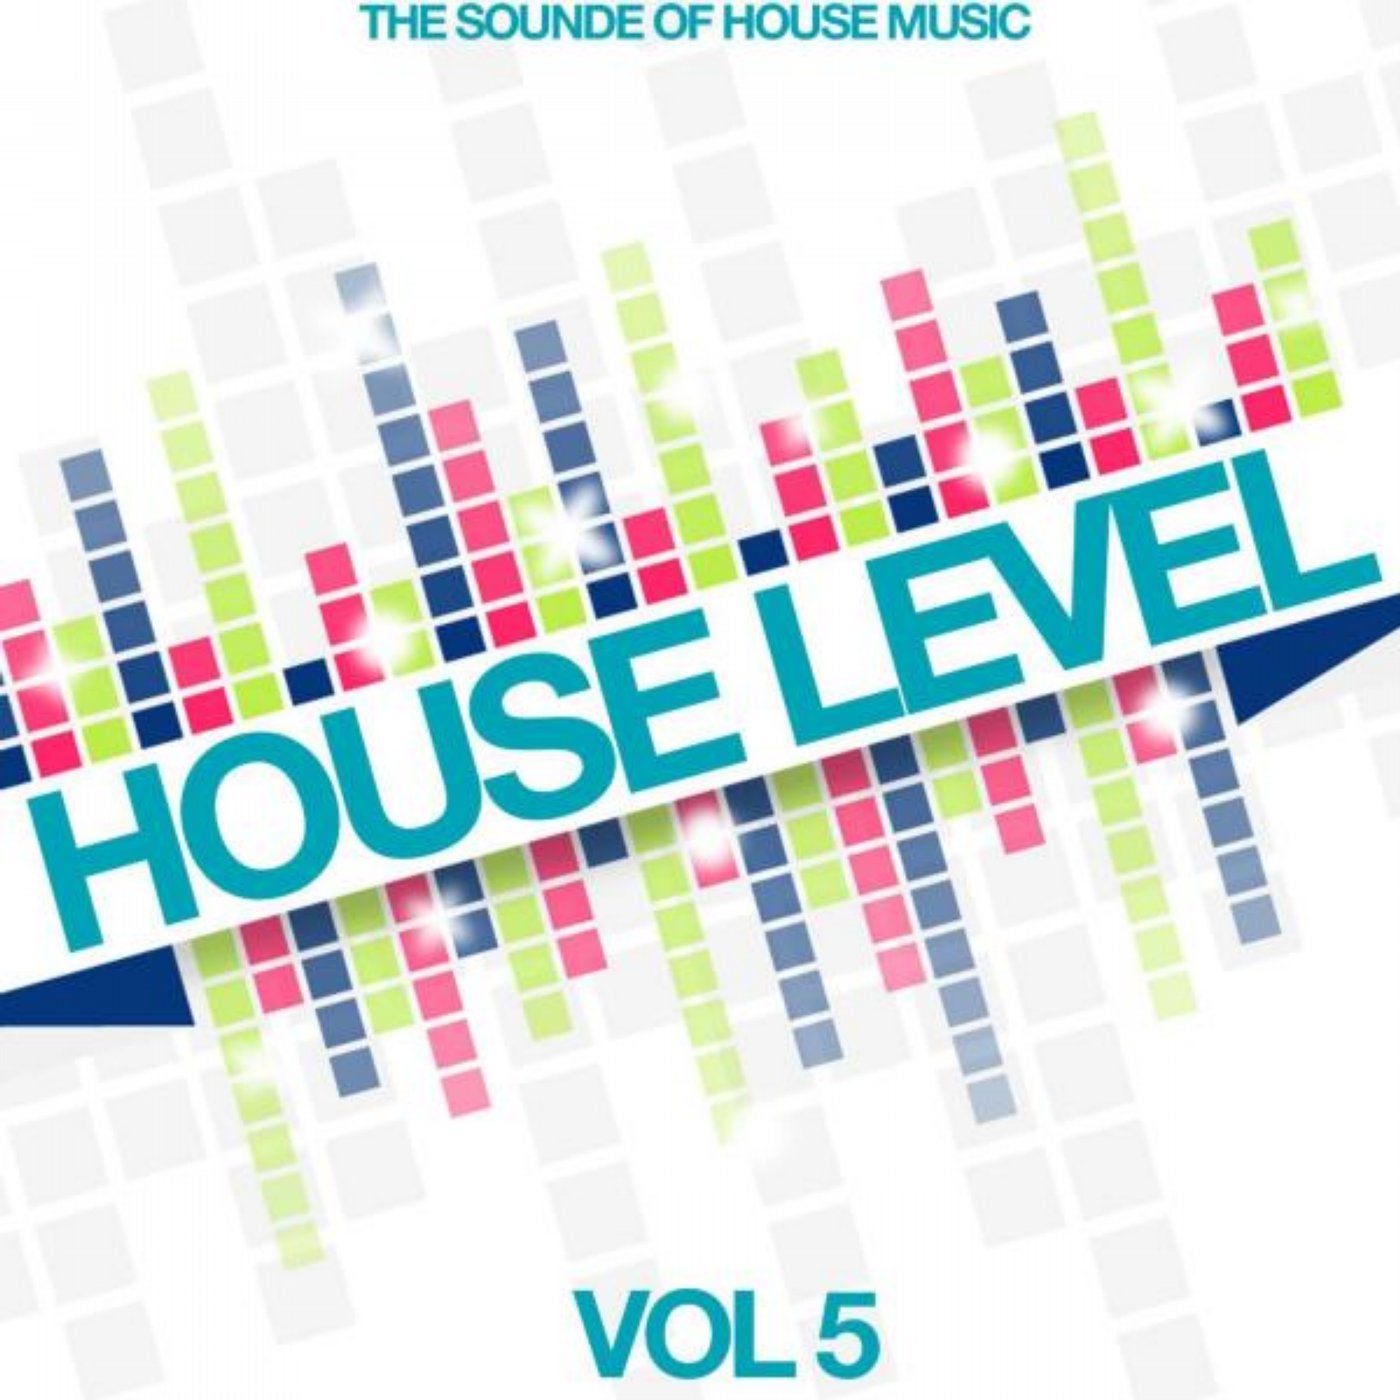 House Level, Vol. 5 (The Sound of House Music)